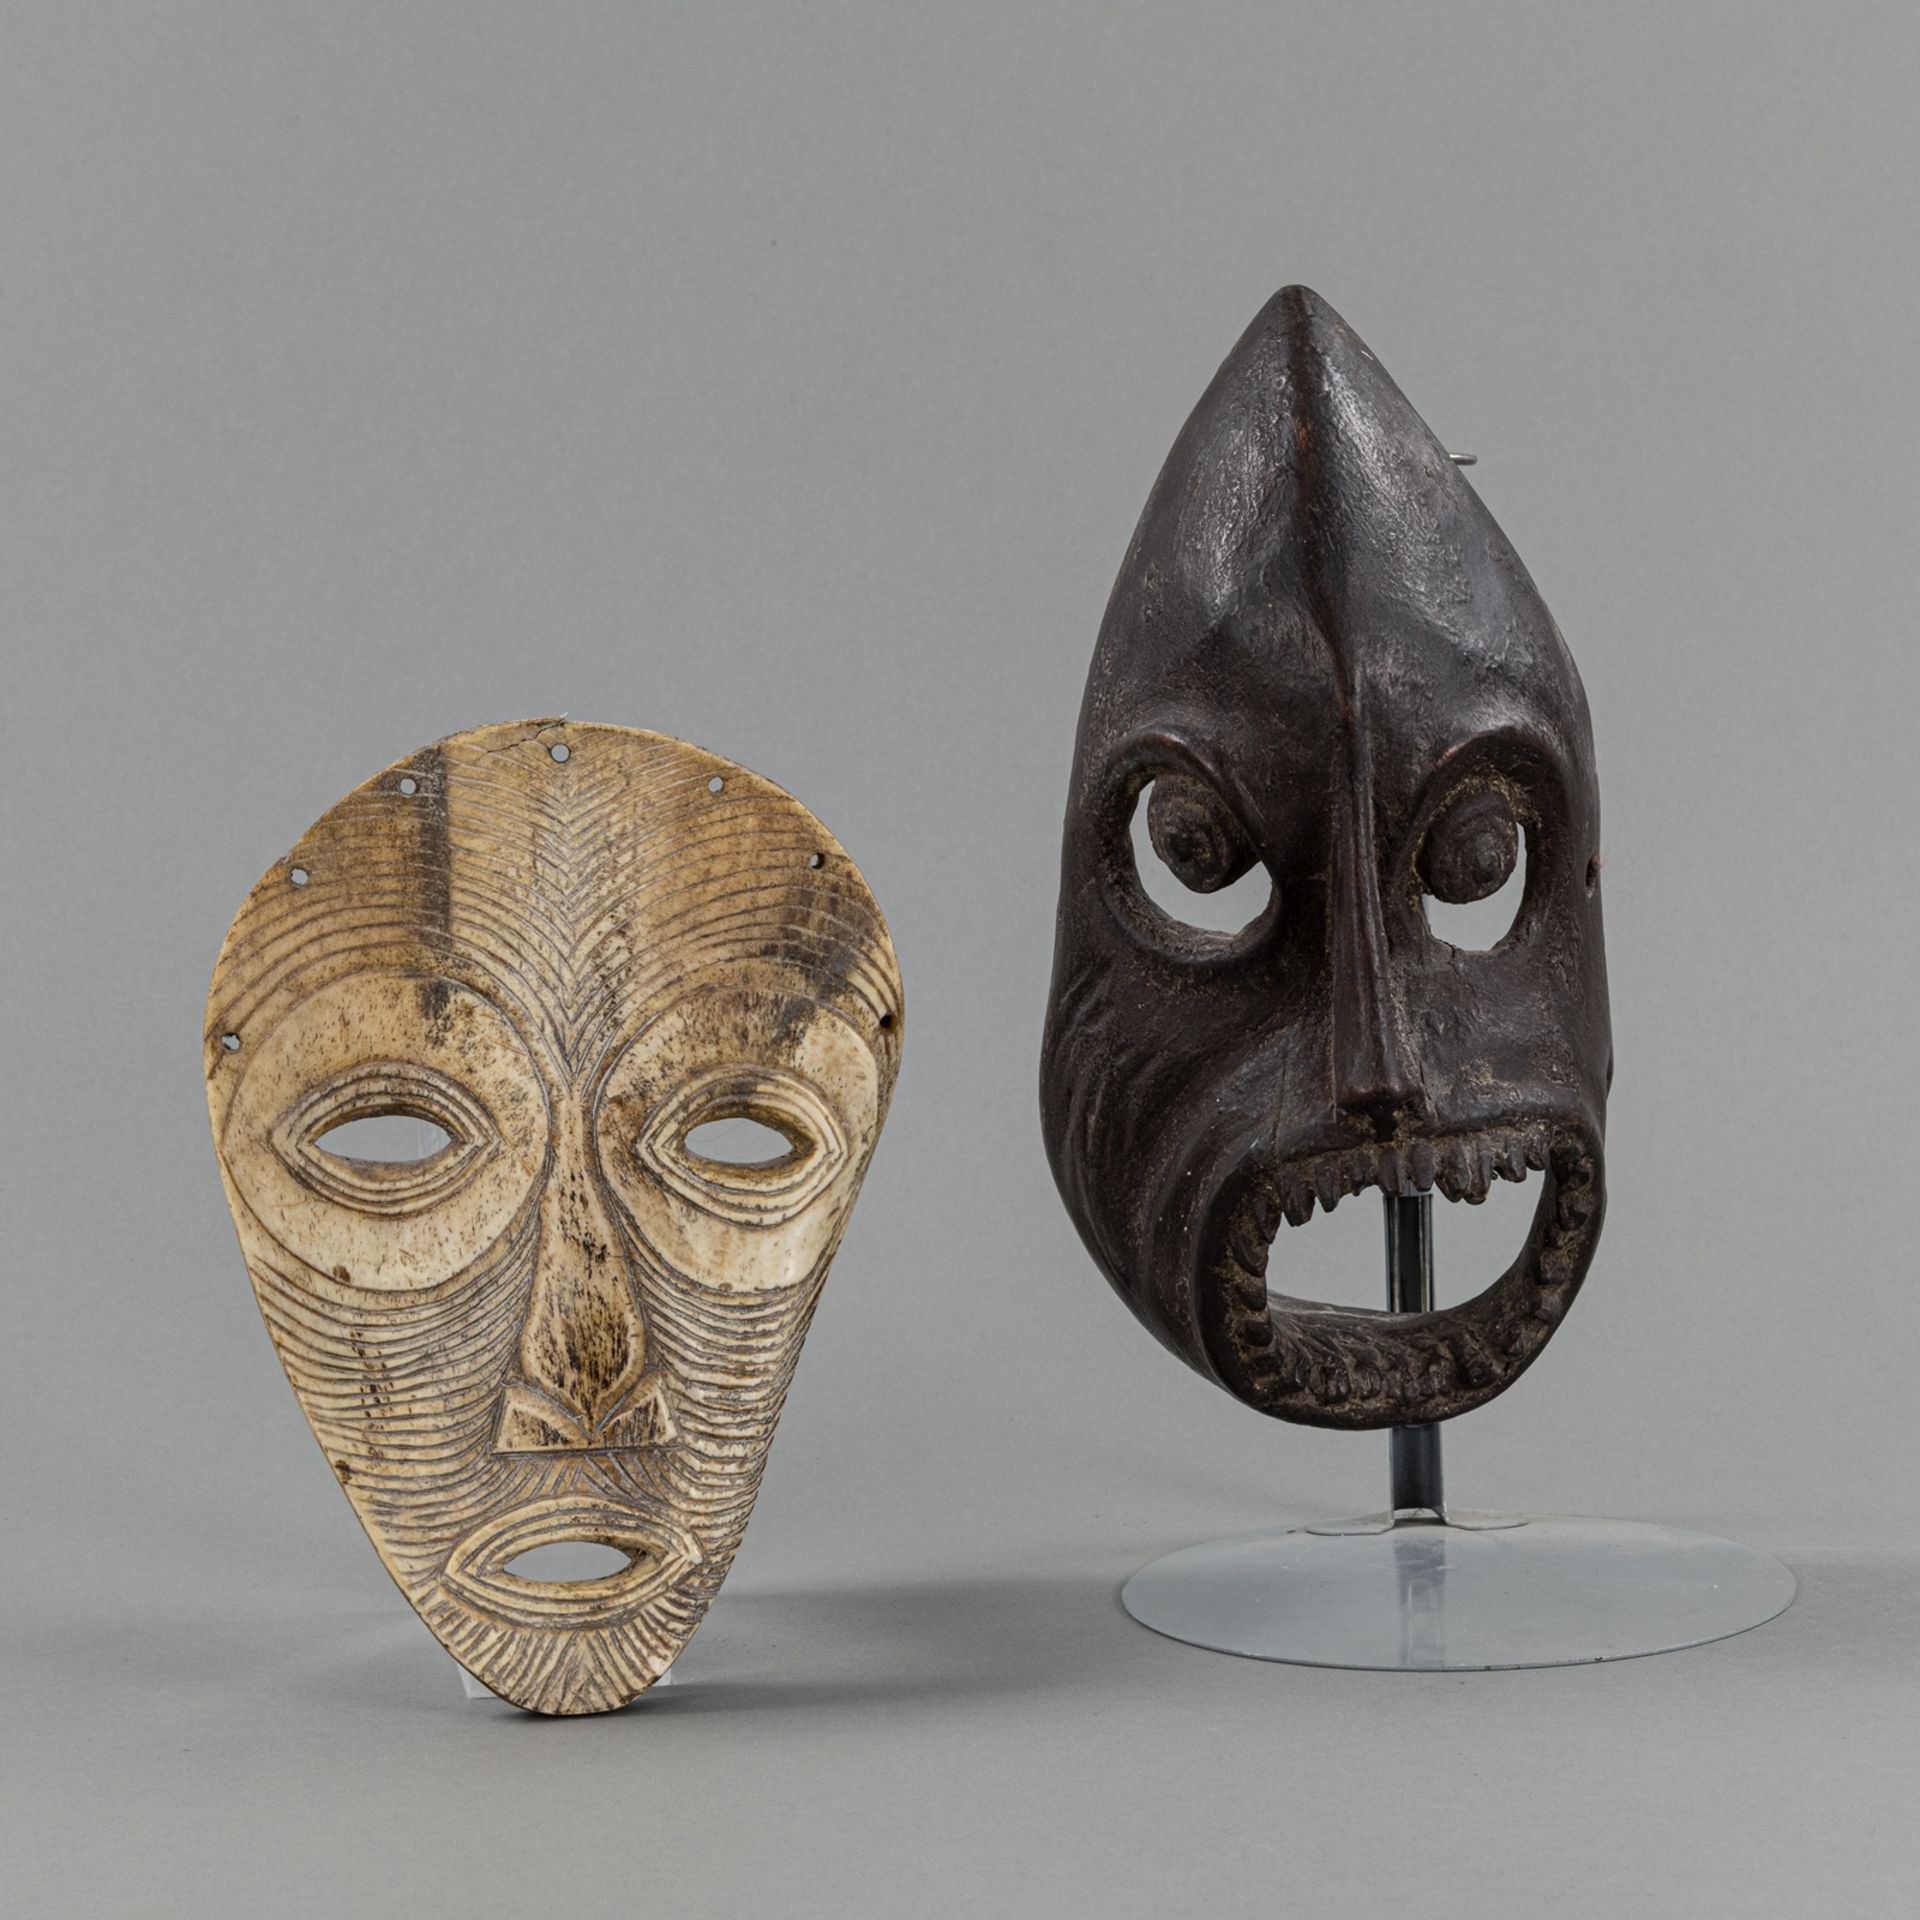 A  LEGA/ ZAIRE BONE MASK, AND A WOODEN MASK